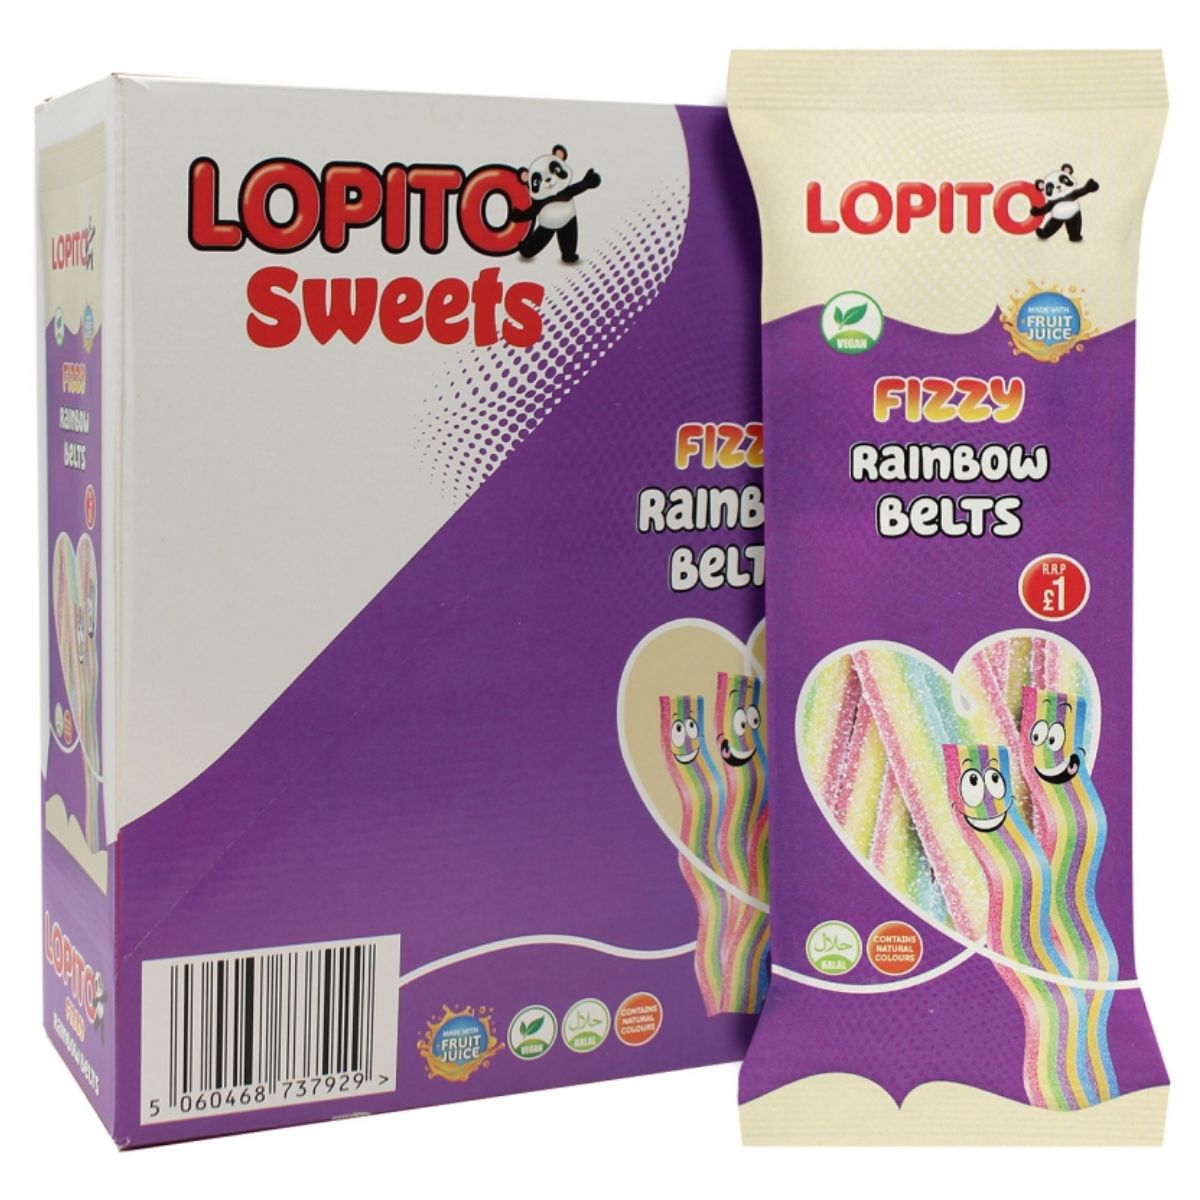 A Lopito - Fizzy Rainbow Belts - 150g box with a Lopito - Fizzy Rainbow Belts - 150g package with a white label.